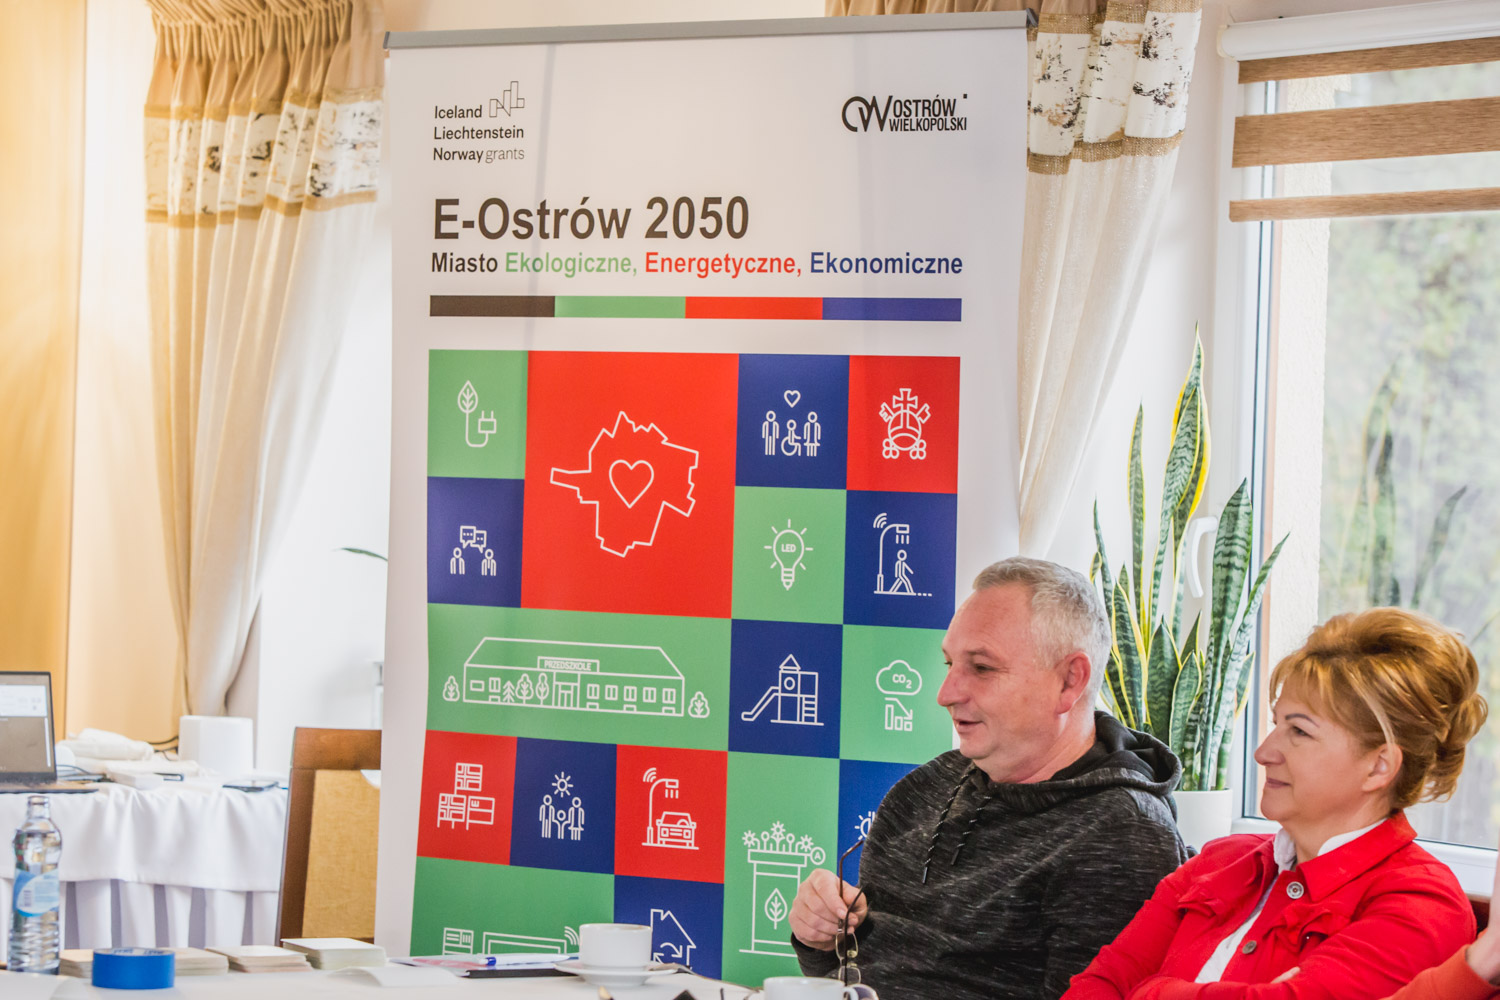 Photo from the training under the project "E-Ostrów 2050 - Ecological, Energy, Economic City".